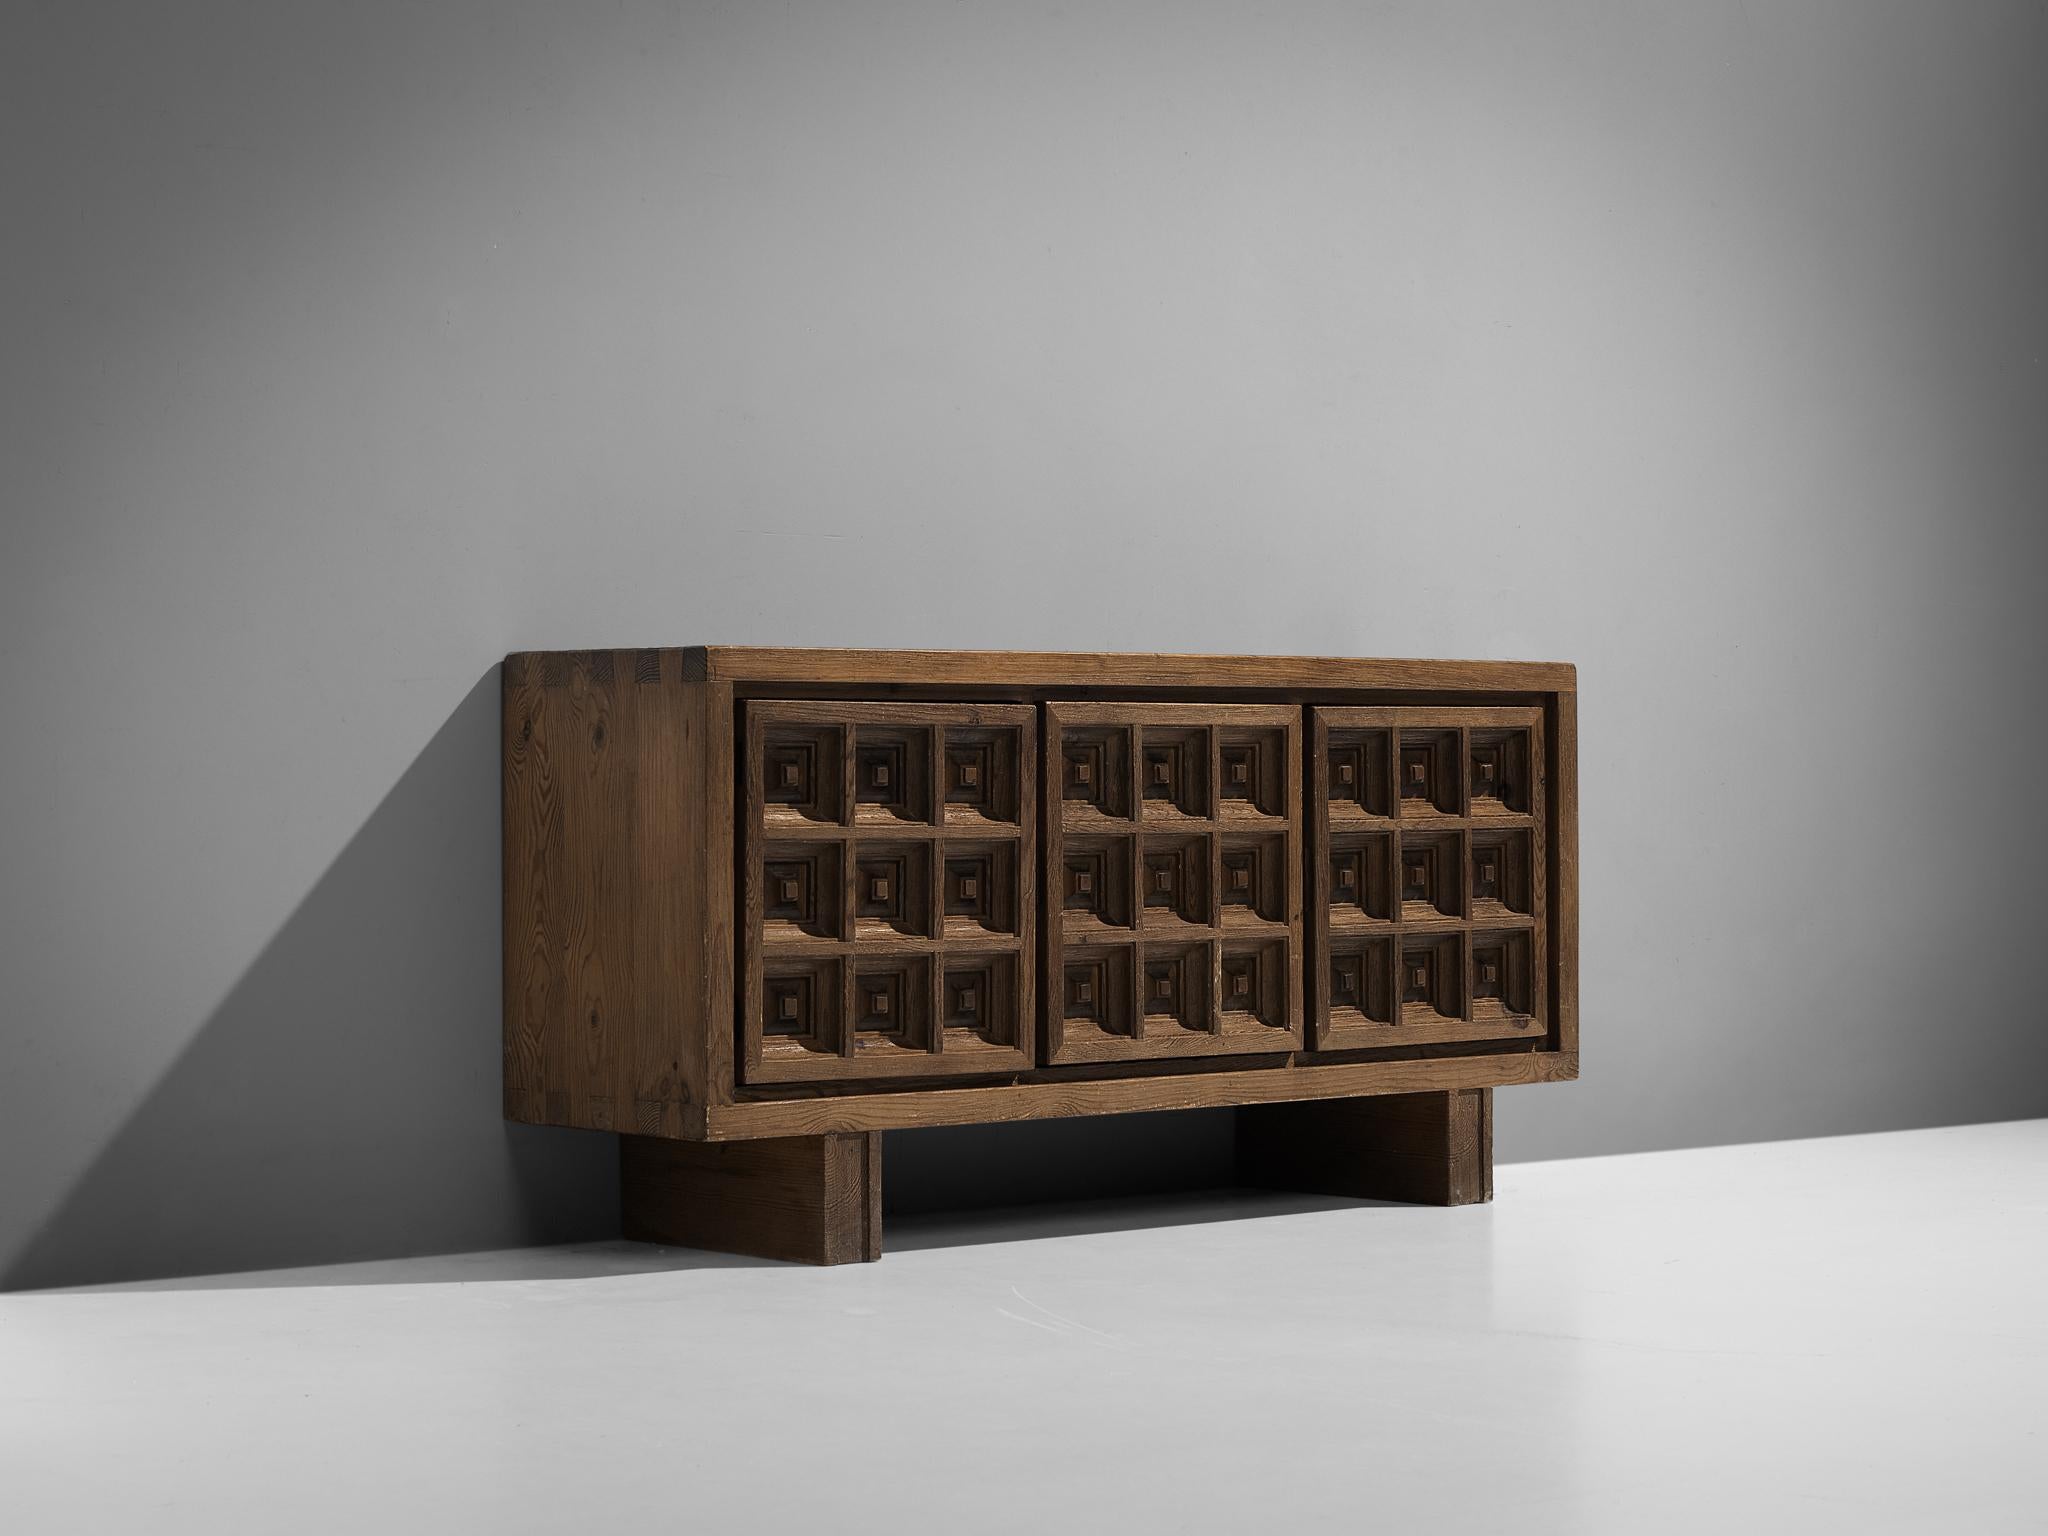 Biosca, sideboard, stained pine, Spain, 1960s.

Outstanding Spanish sideboard that is executed by Biosca in a beautiful way. The three-door credenza features doors with a graphic carved pattern. This is very typical for Brutalist style, while the